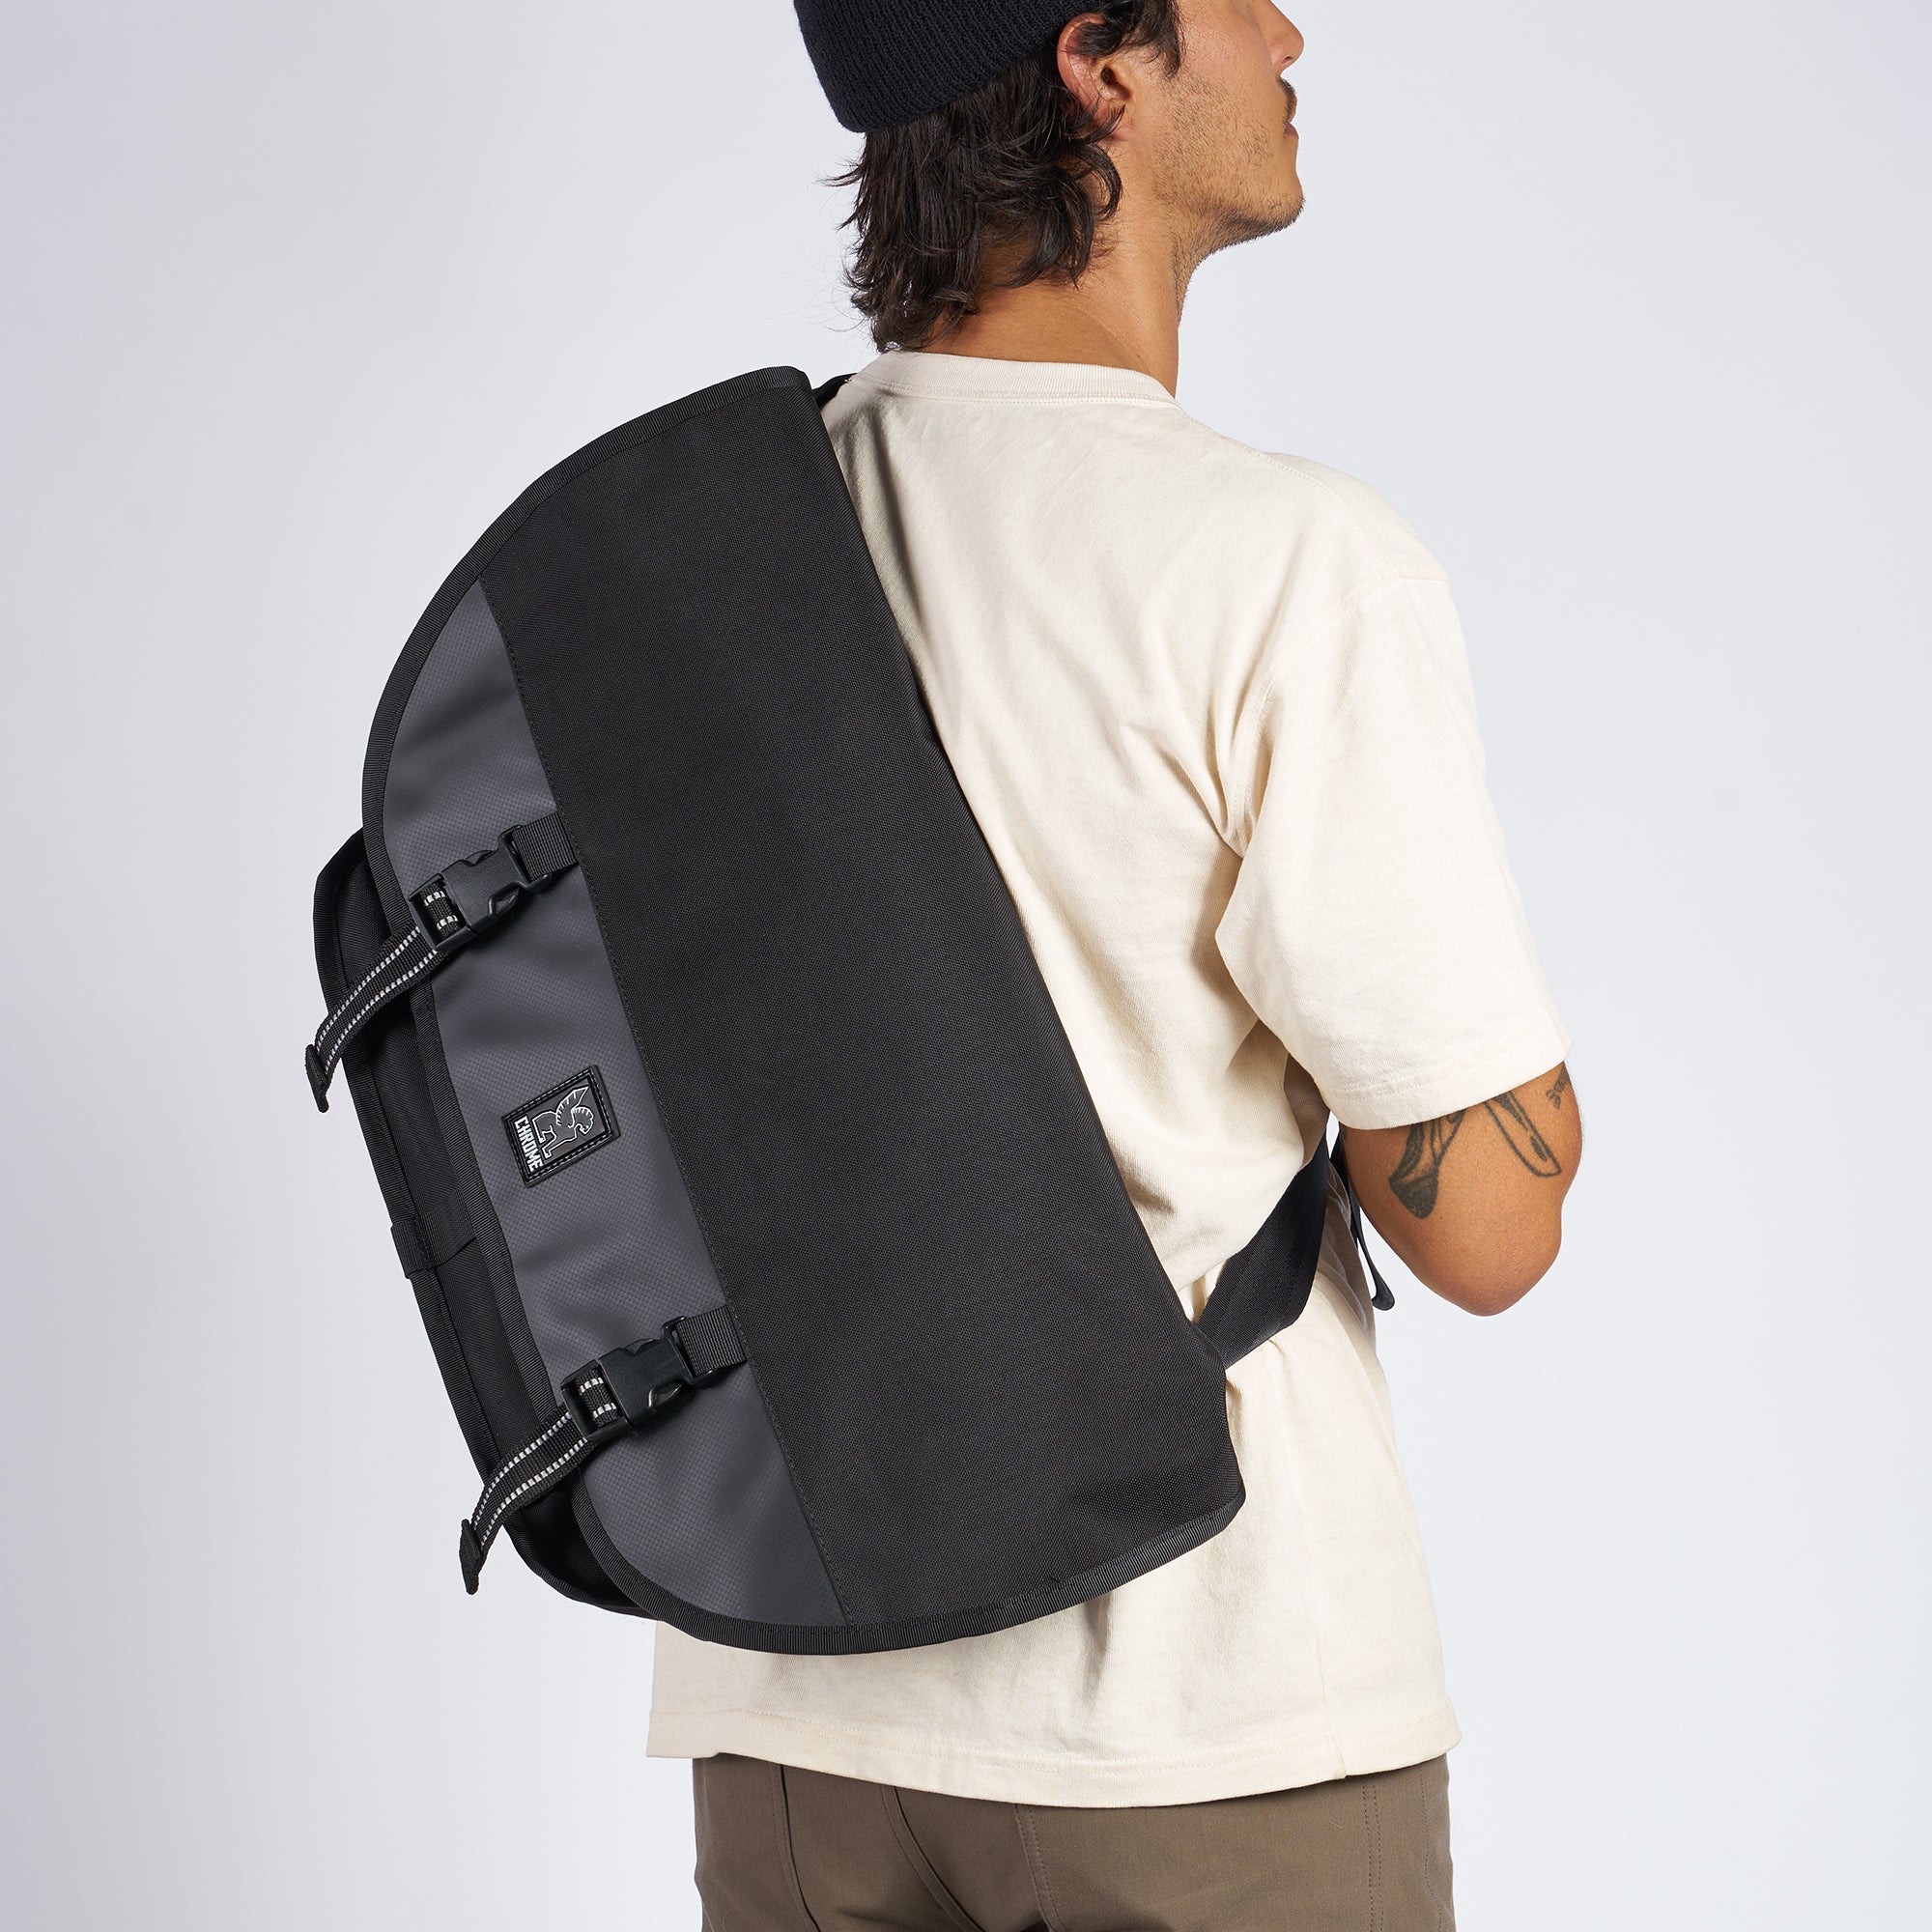 24L Citizen Messenger in black, back view on a man